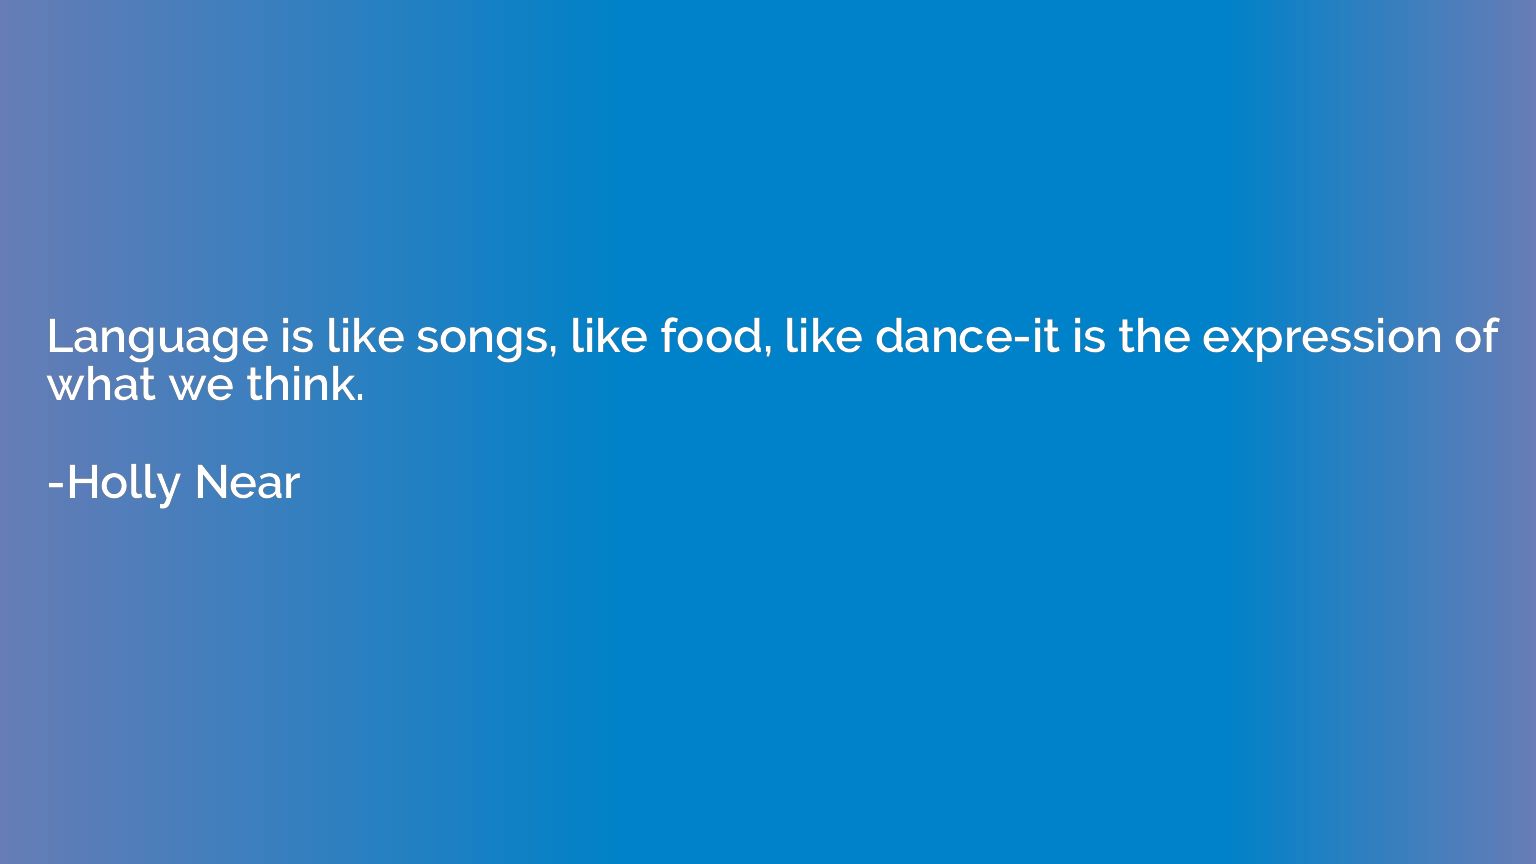 Language is like songs, like food, like dance-it is the expr